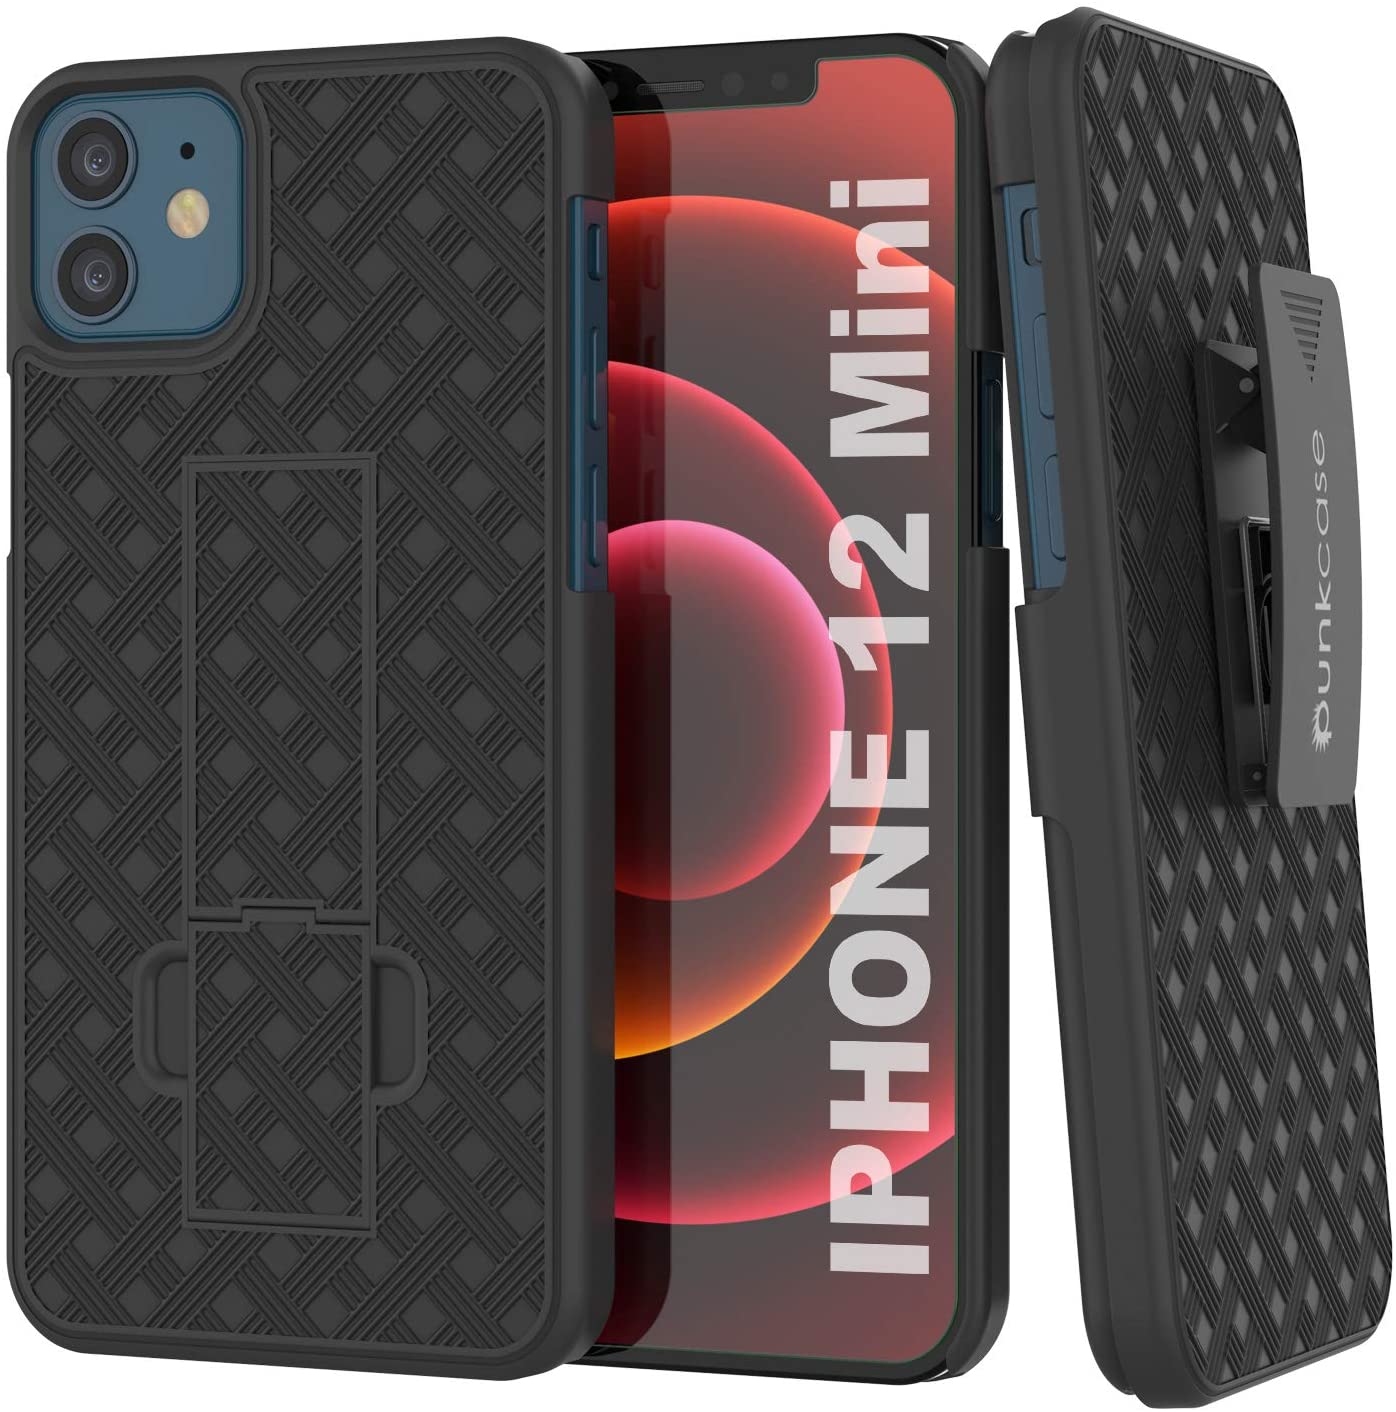 Punkcase iPhone 12 Mini Case With Tempered Glass Screen Protector, Holster Belt Clip & Built-In Kickstand [Black]